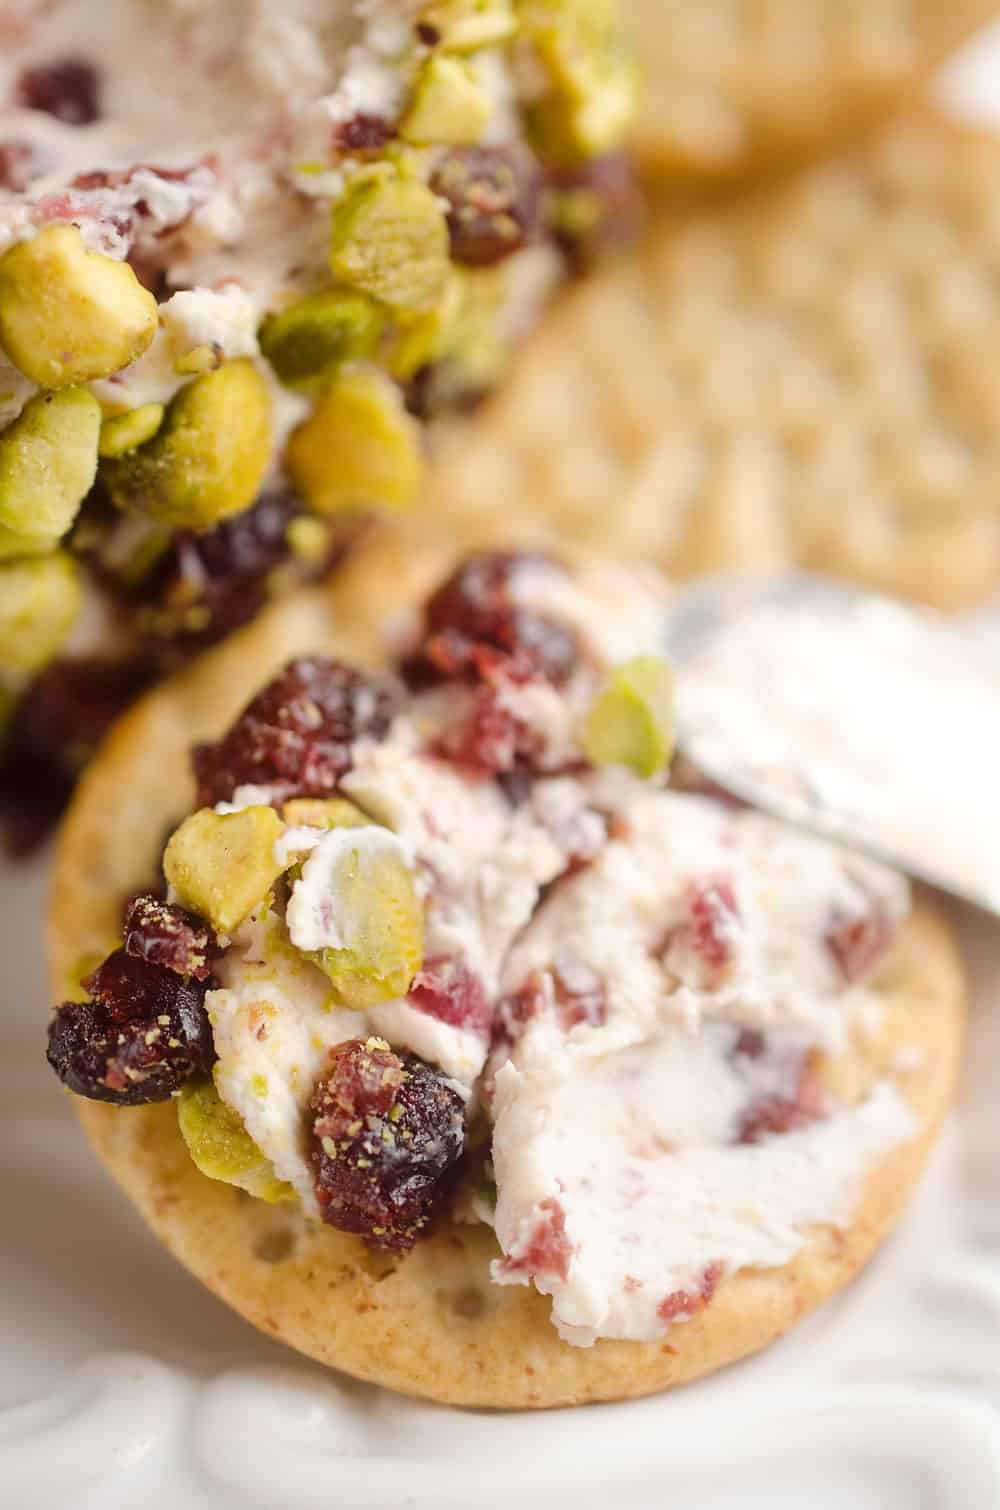 Cranberry Pistachio Cheese Ball is a festive red and green appetizer fantastic for the holidays! A cream cheese and cranberry mixture is rolled in salty pistachios and served with your favorite crackers for the perfect party food. 